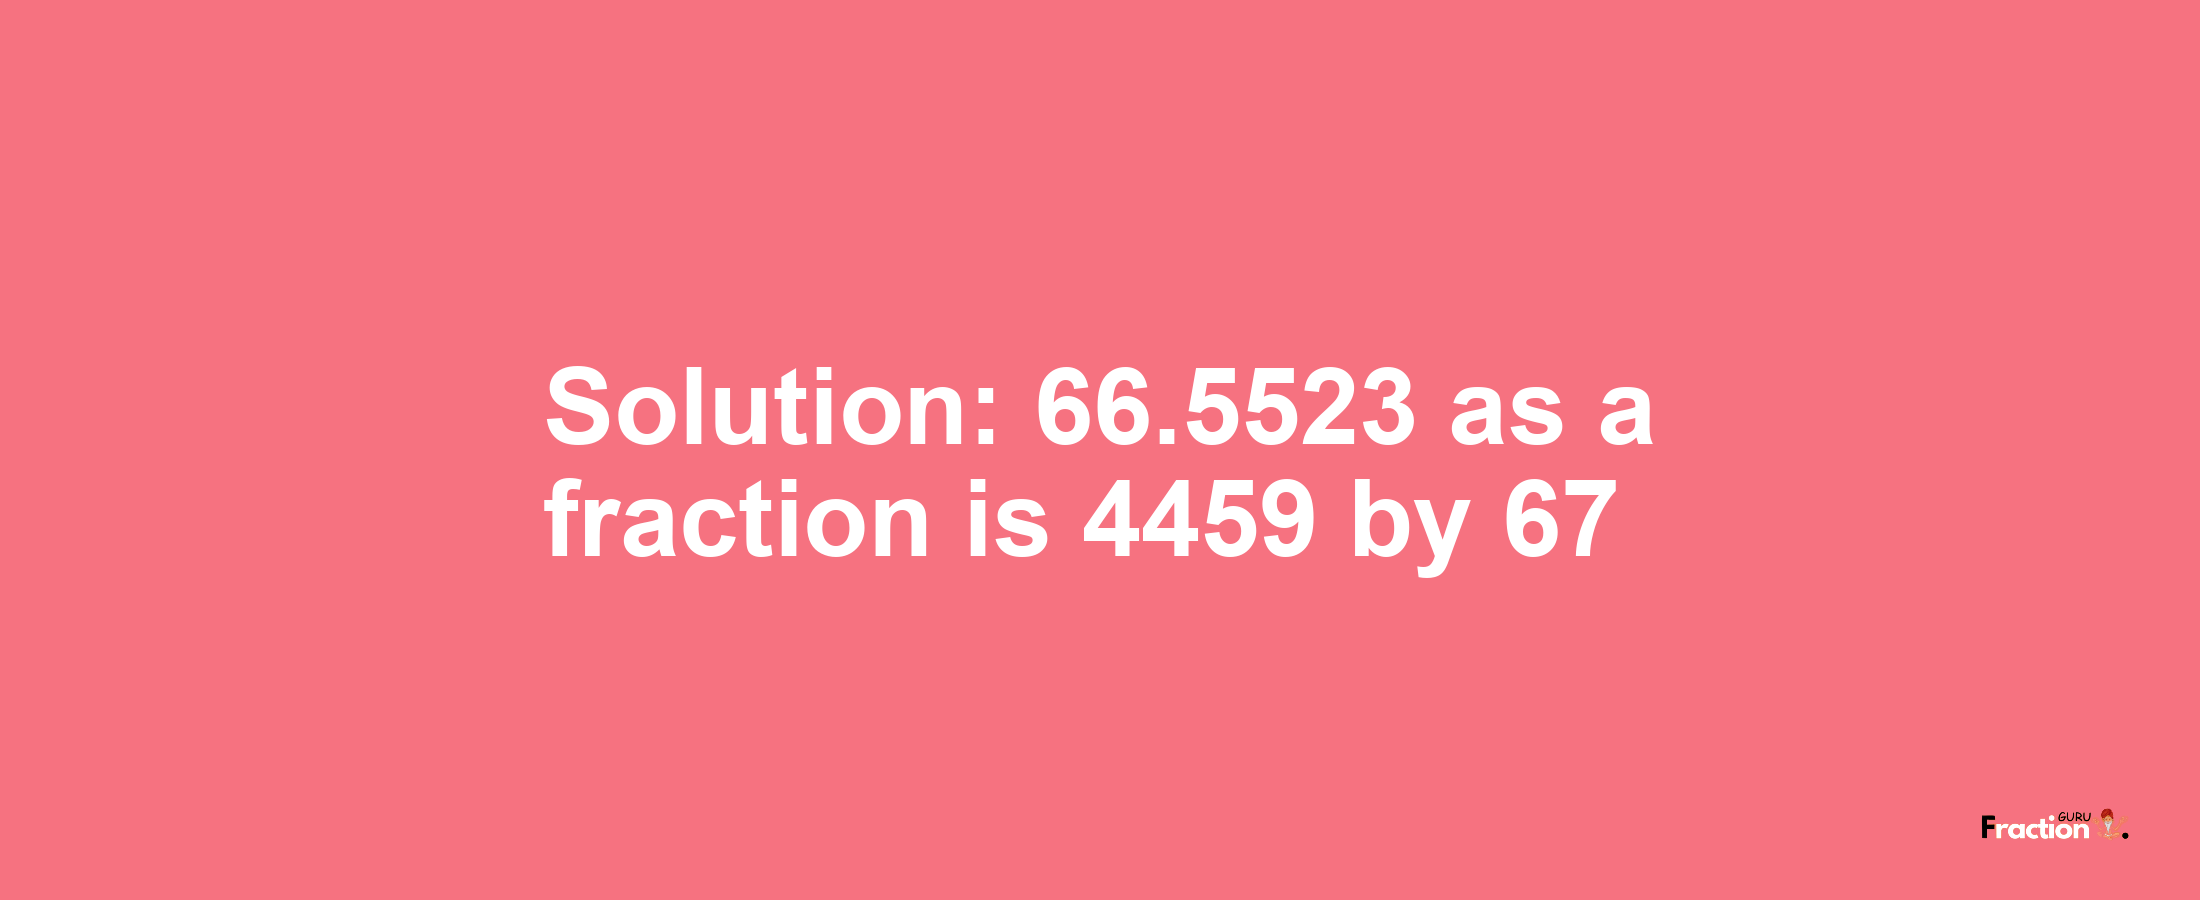 Solution:66.5523 as a fraction is 4459/67